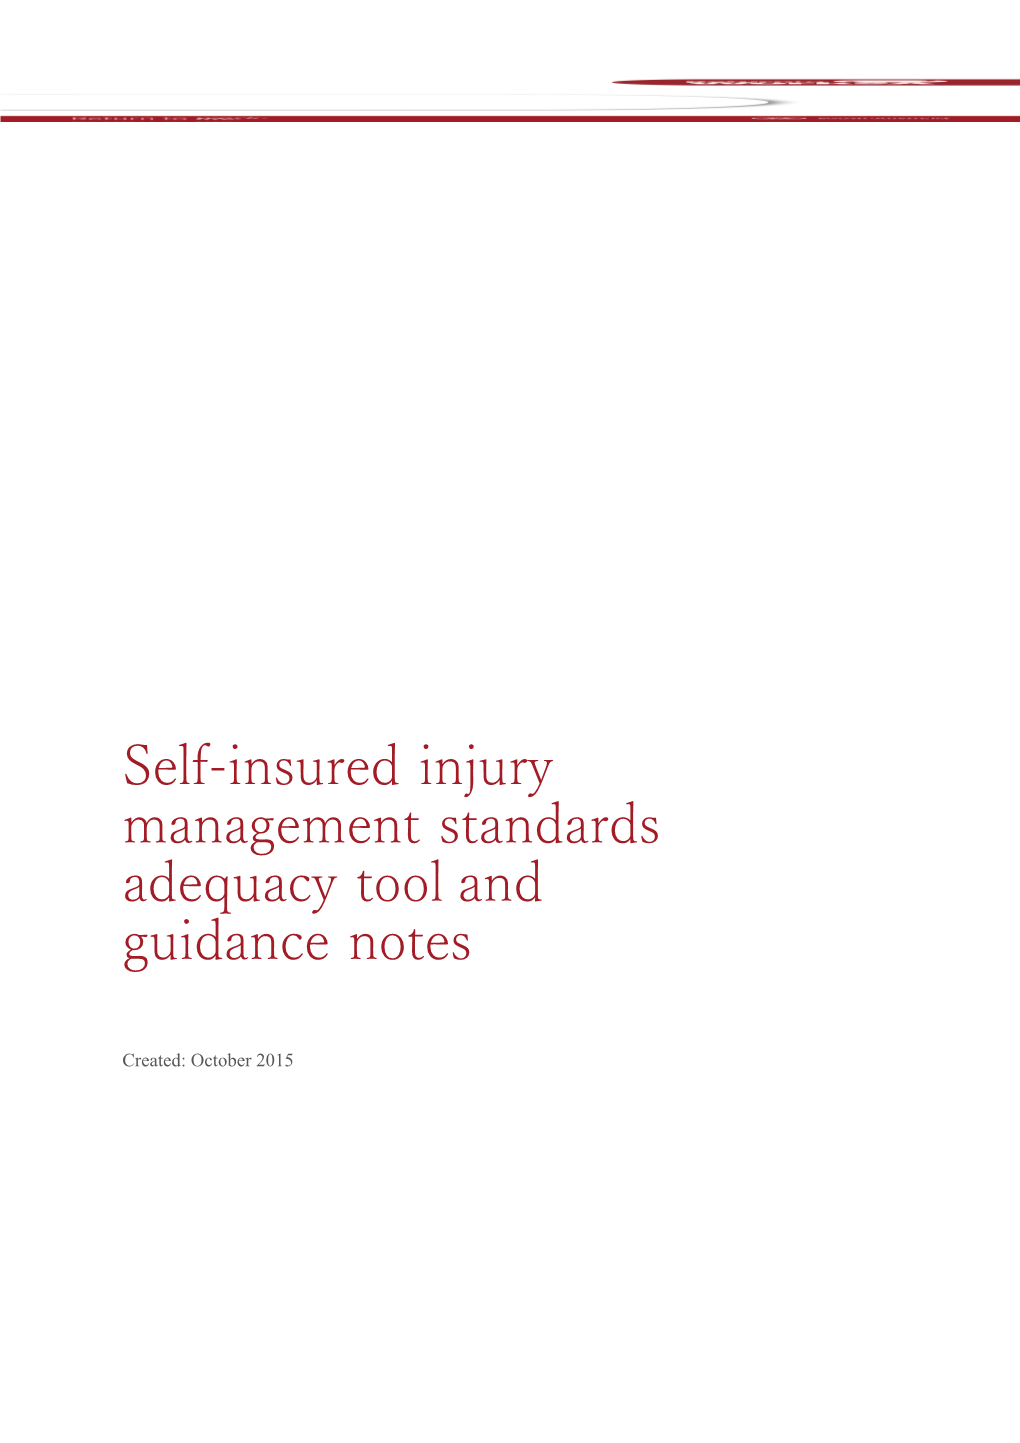 Self-Insured Injury Management Standards Adequacy Tool and Guidance Notes